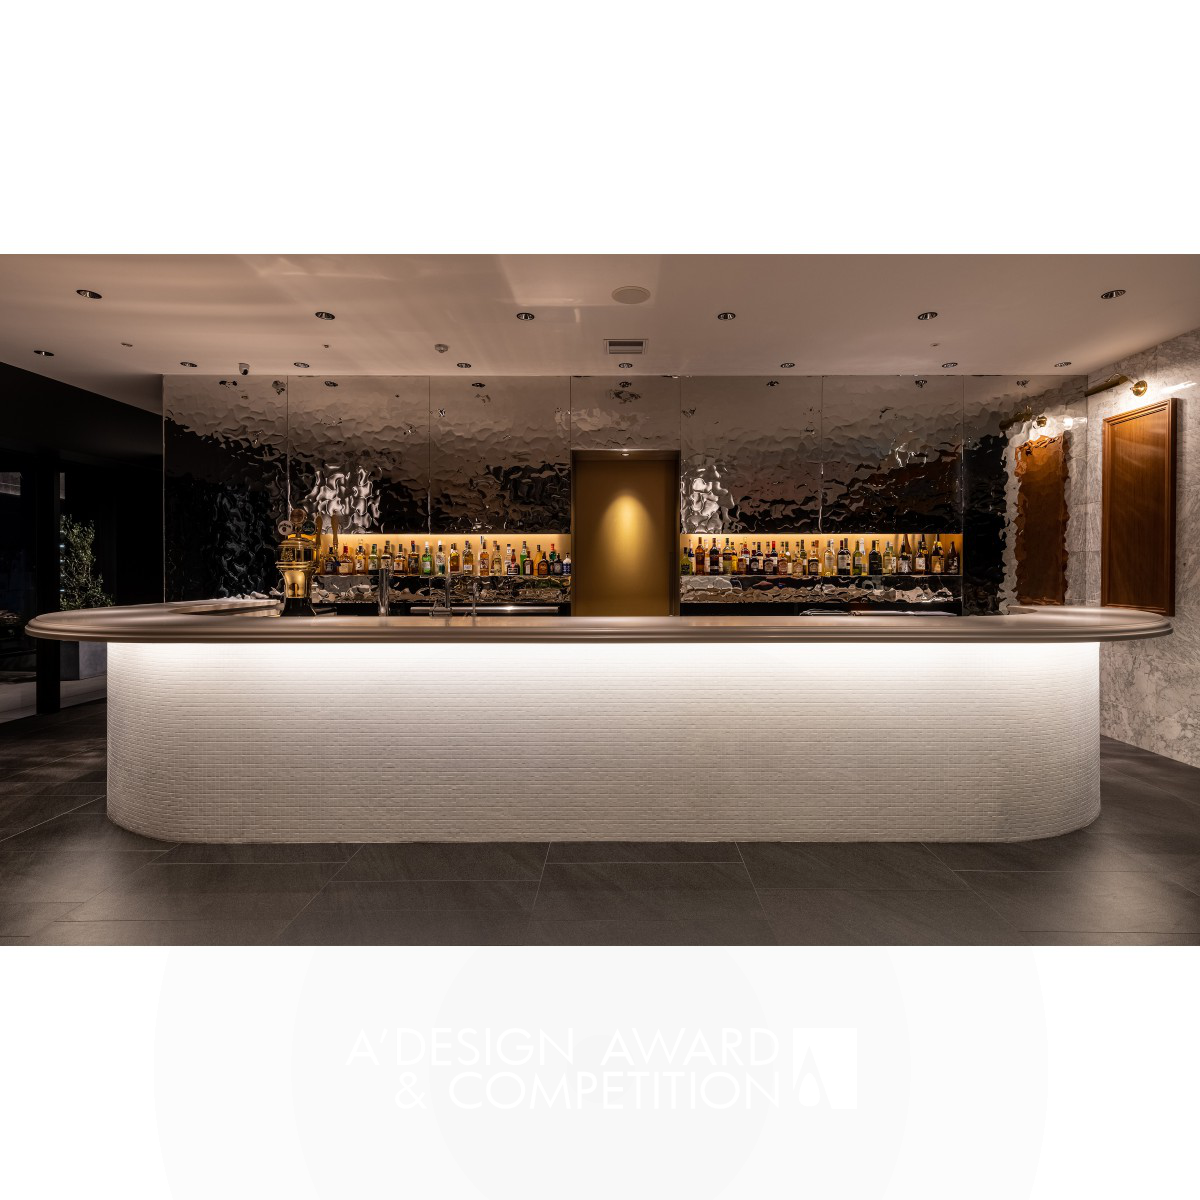 Wavy Stillness: A Fusion of Luxury Cafe and Sports Bar